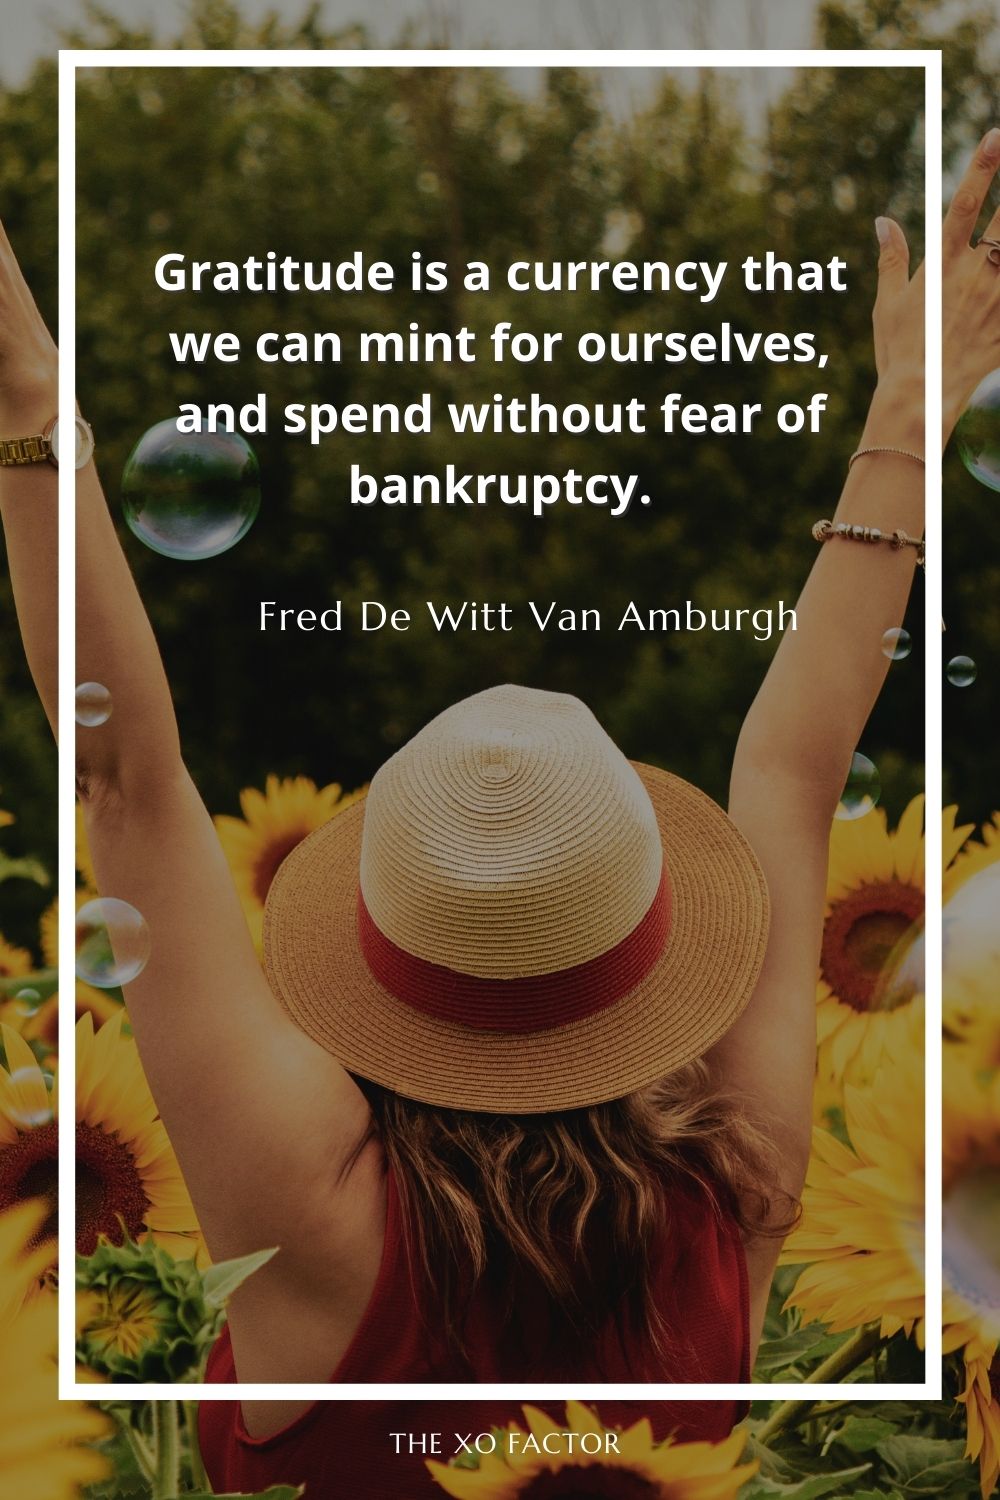 Gratitude is a currency that we can mint for ourselves, and spend without fear of bankruptcy.